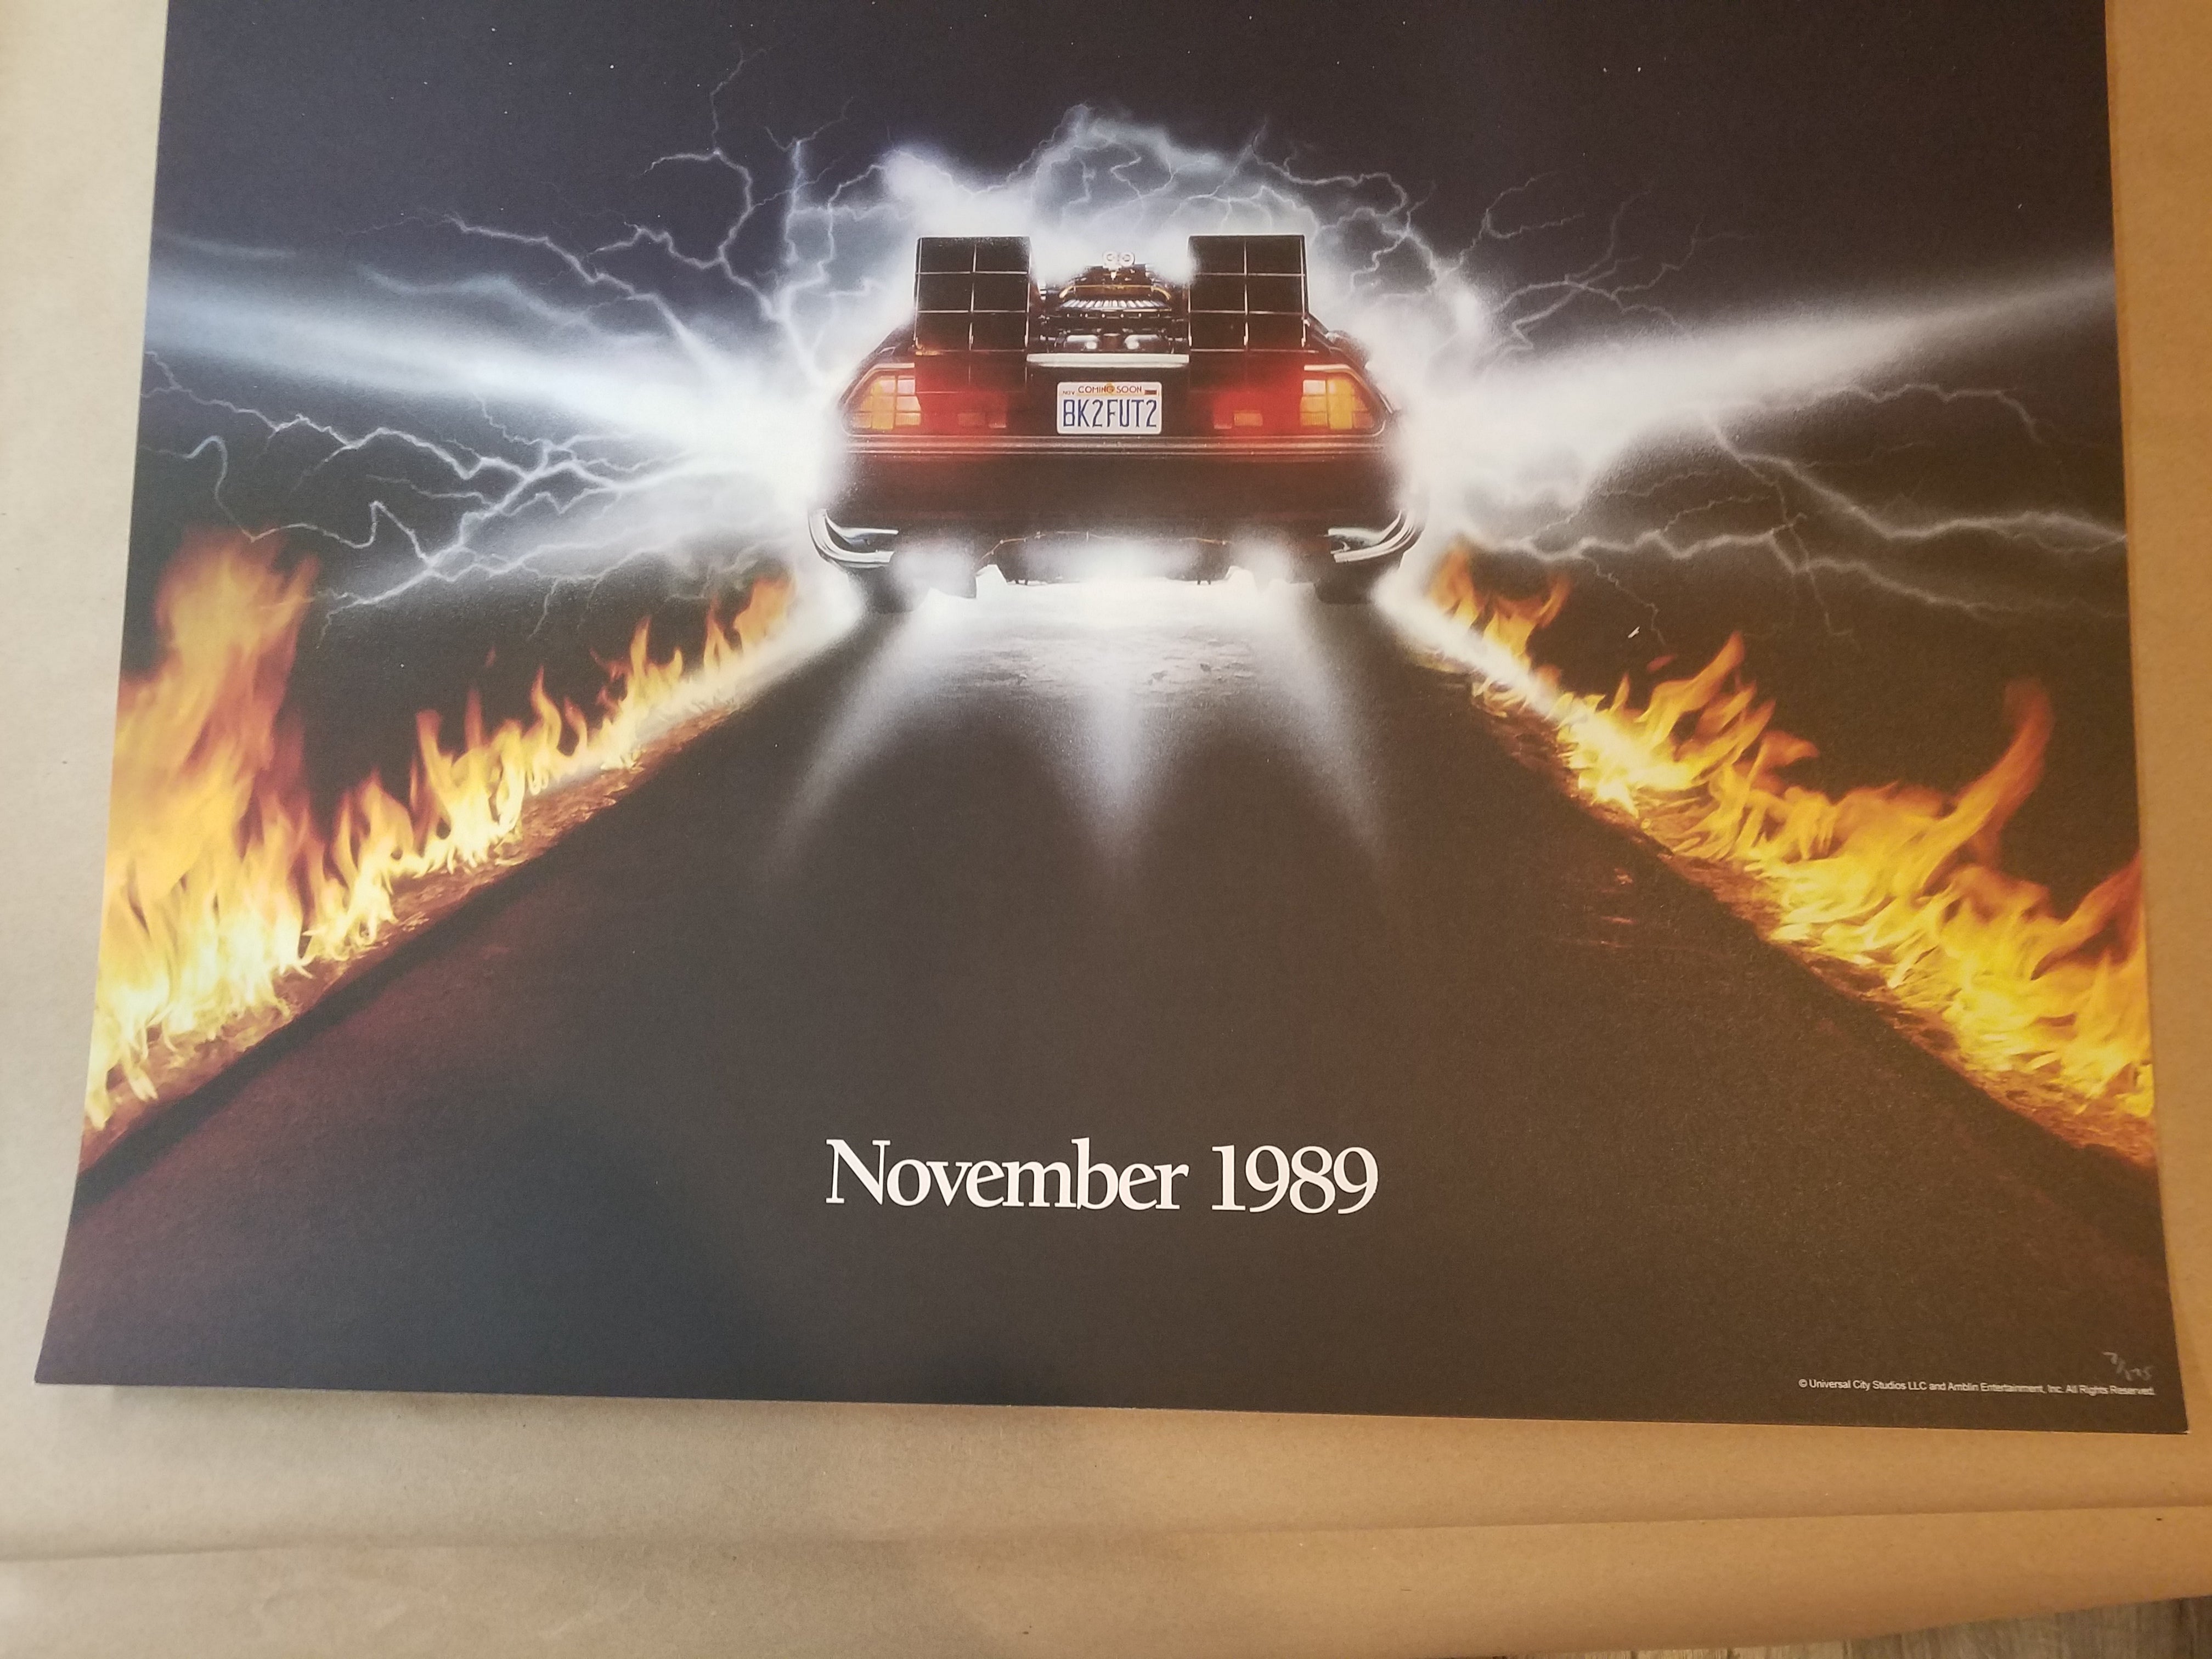 "BACK TO THE FUTURE: PART II - TEASER POSTER - VERSION 1"  Offset lithograph with spot inks.  24 x 36 inches.  Hand-numbered edition of 175.  Co-released with Vice Press.